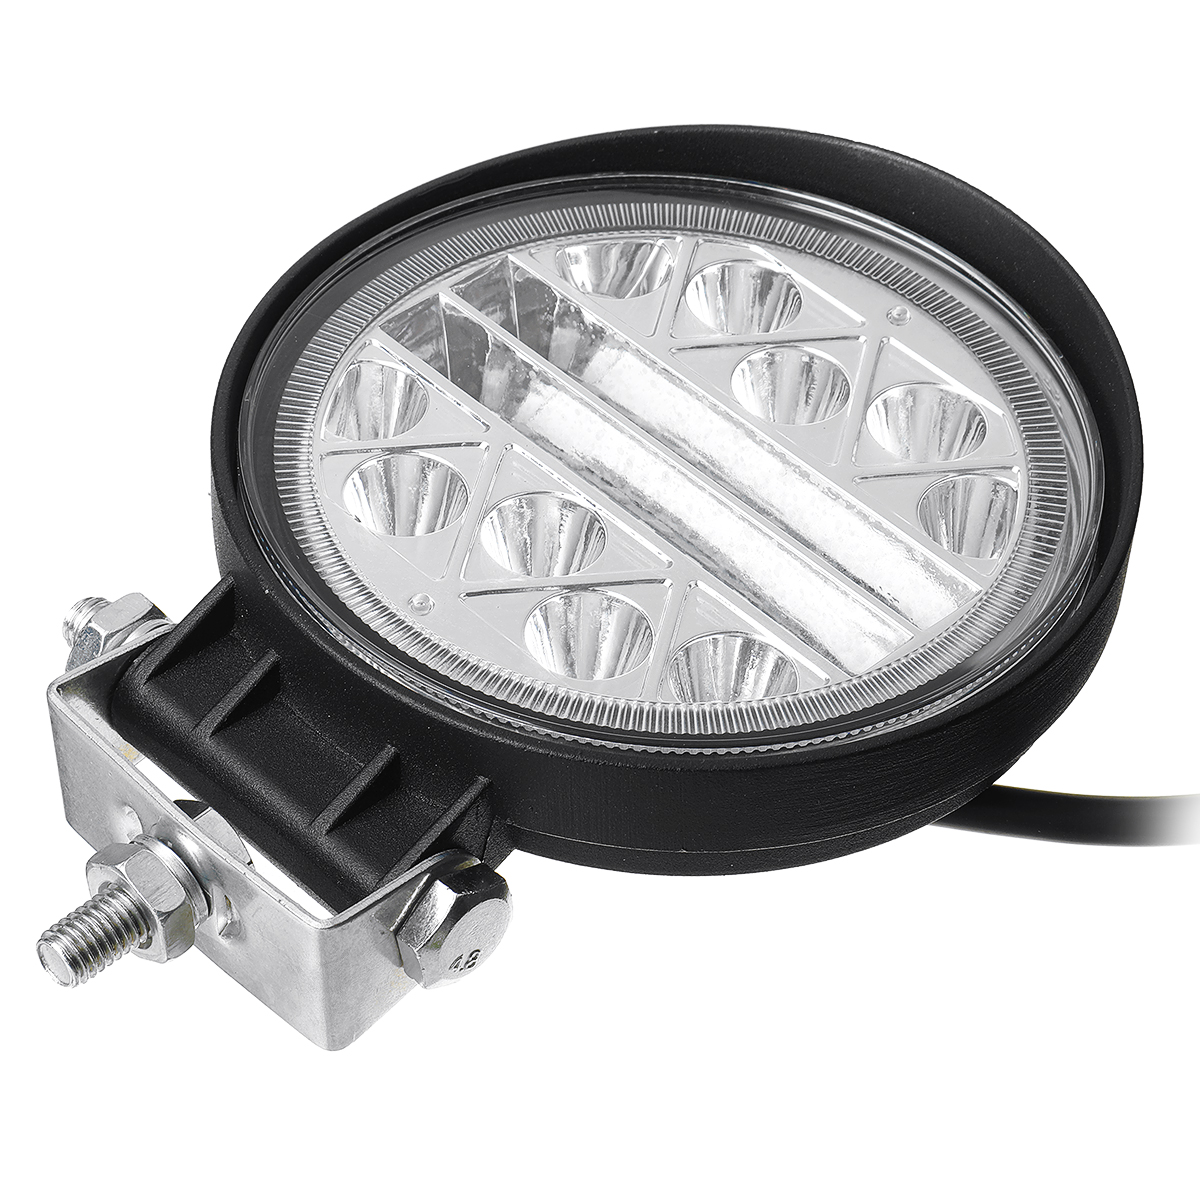 4 Inch Square/Round LED Work Light Spot Flood Driving Light Truck off Road Tractor - Auto GoShop